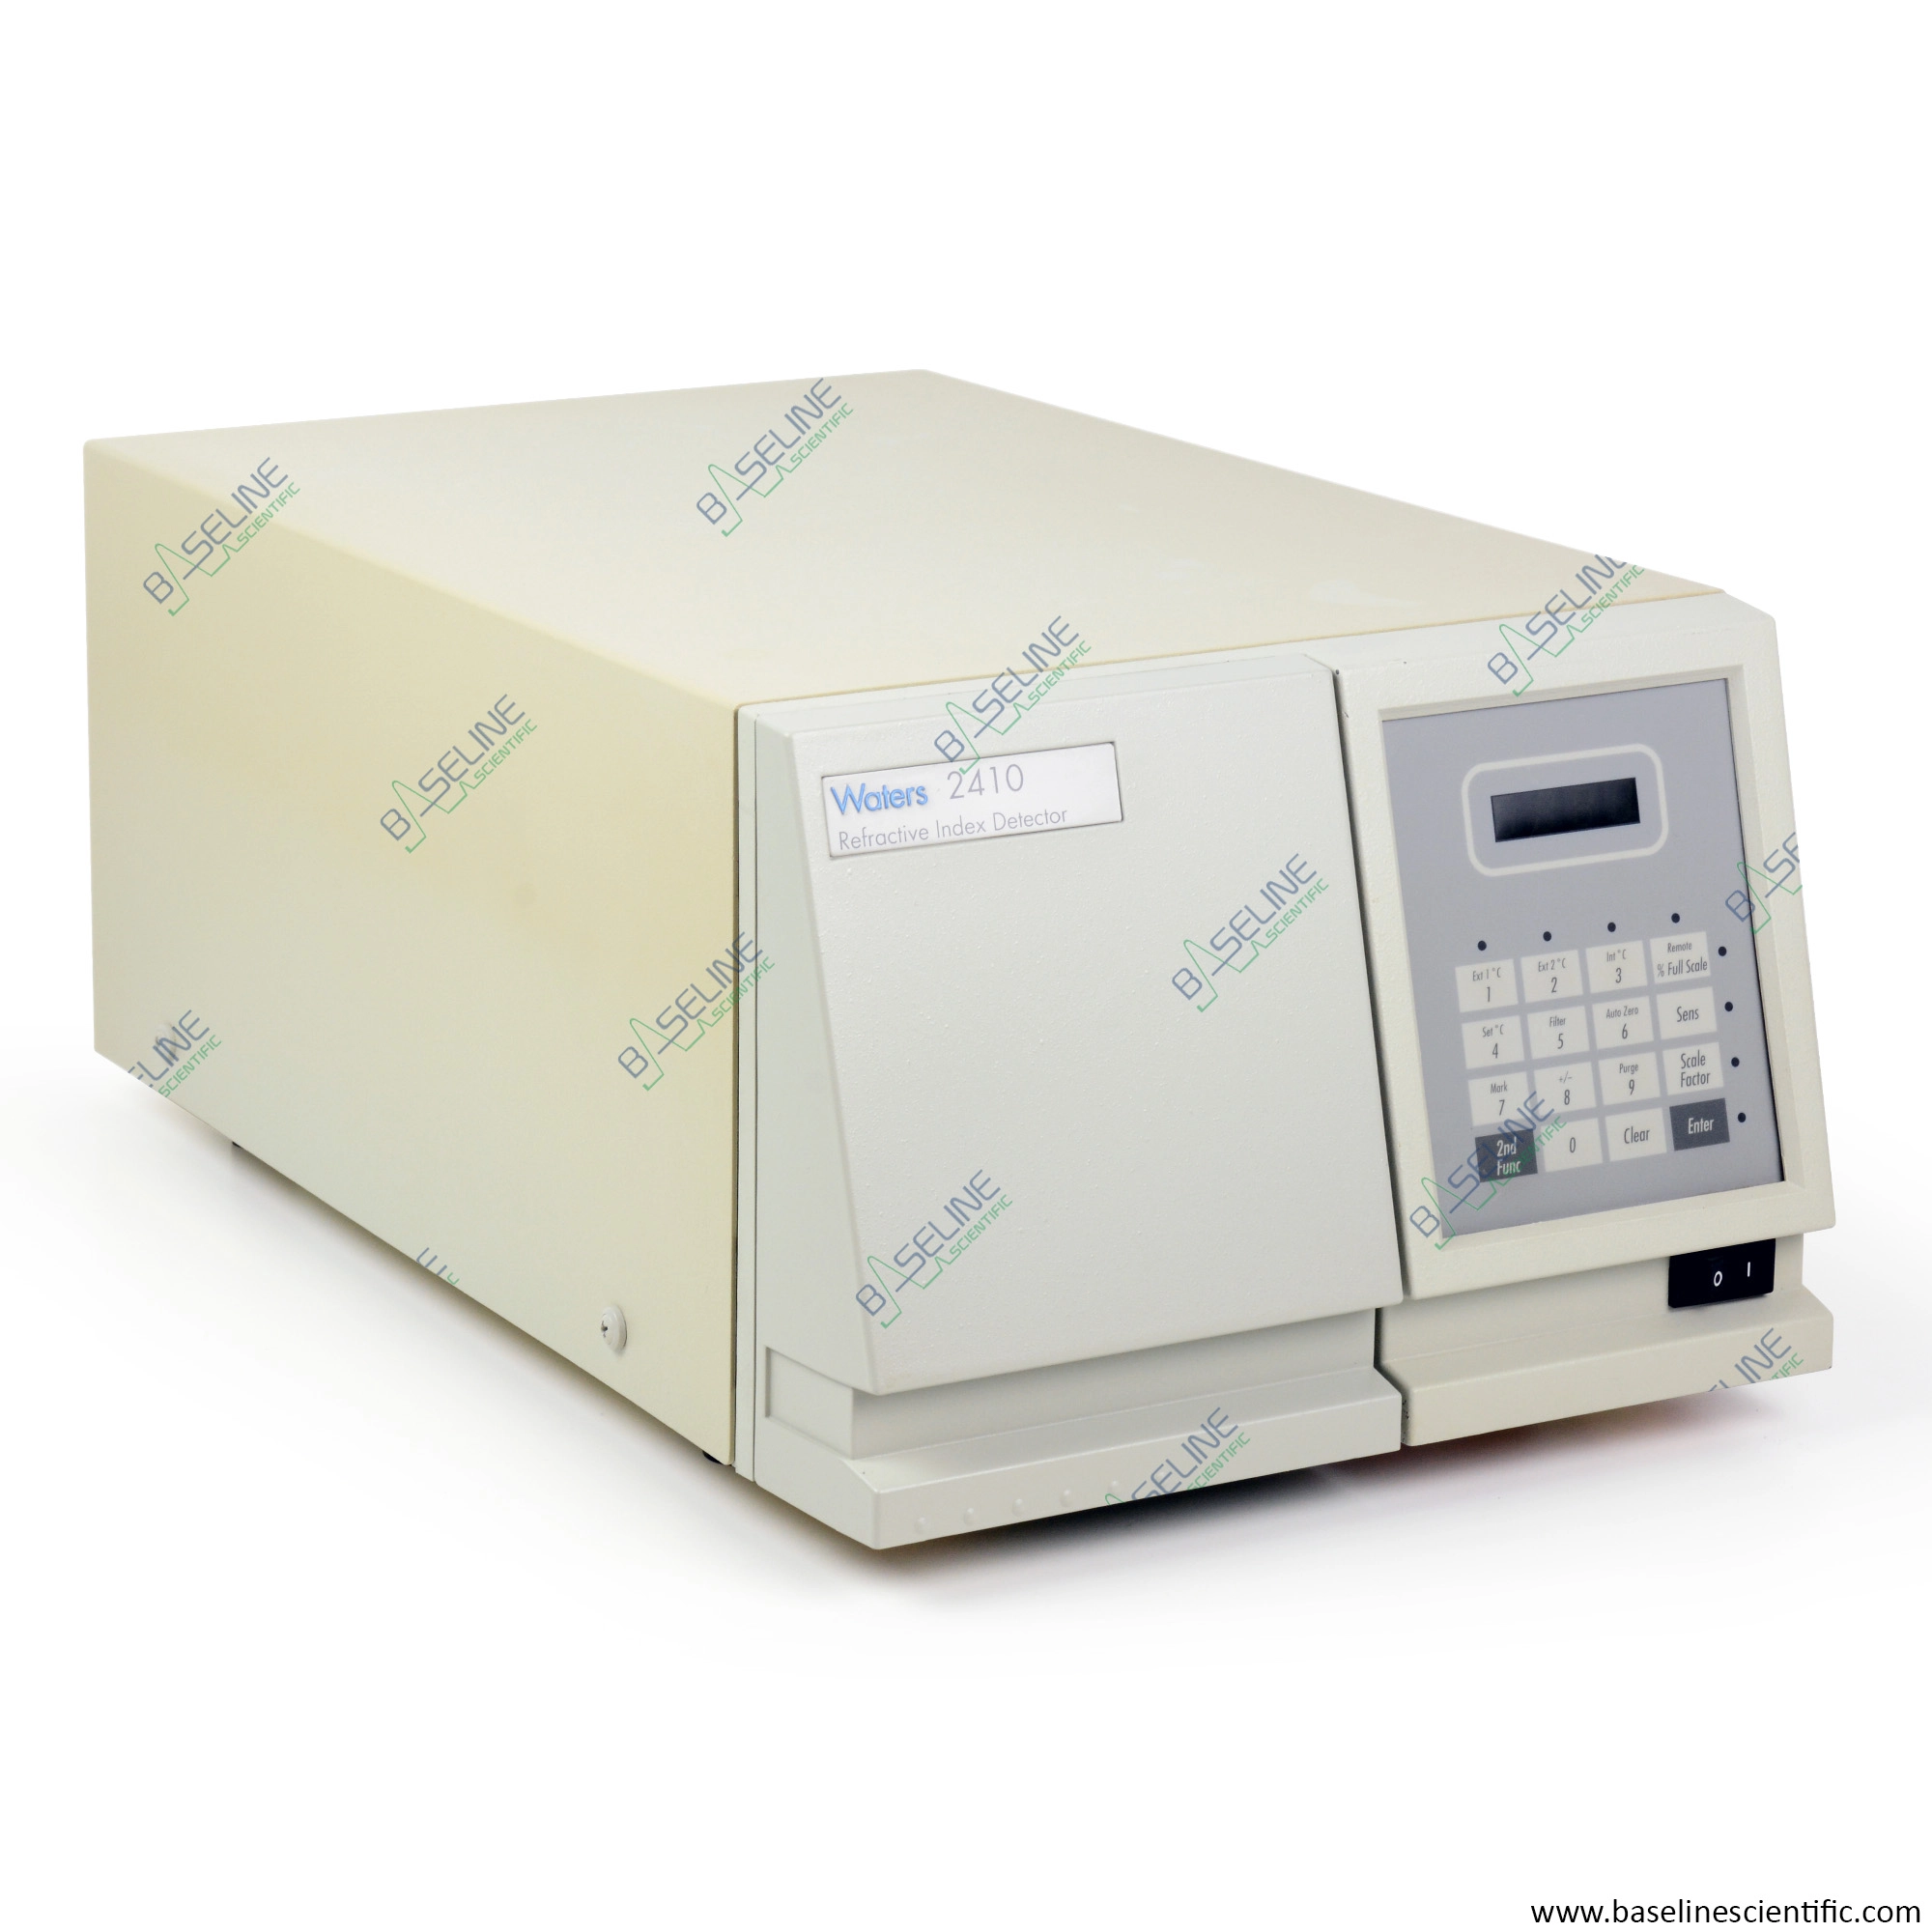 Refurbished Waters 2410 Refractive Index Detector with ONE YEAR WARRANTY